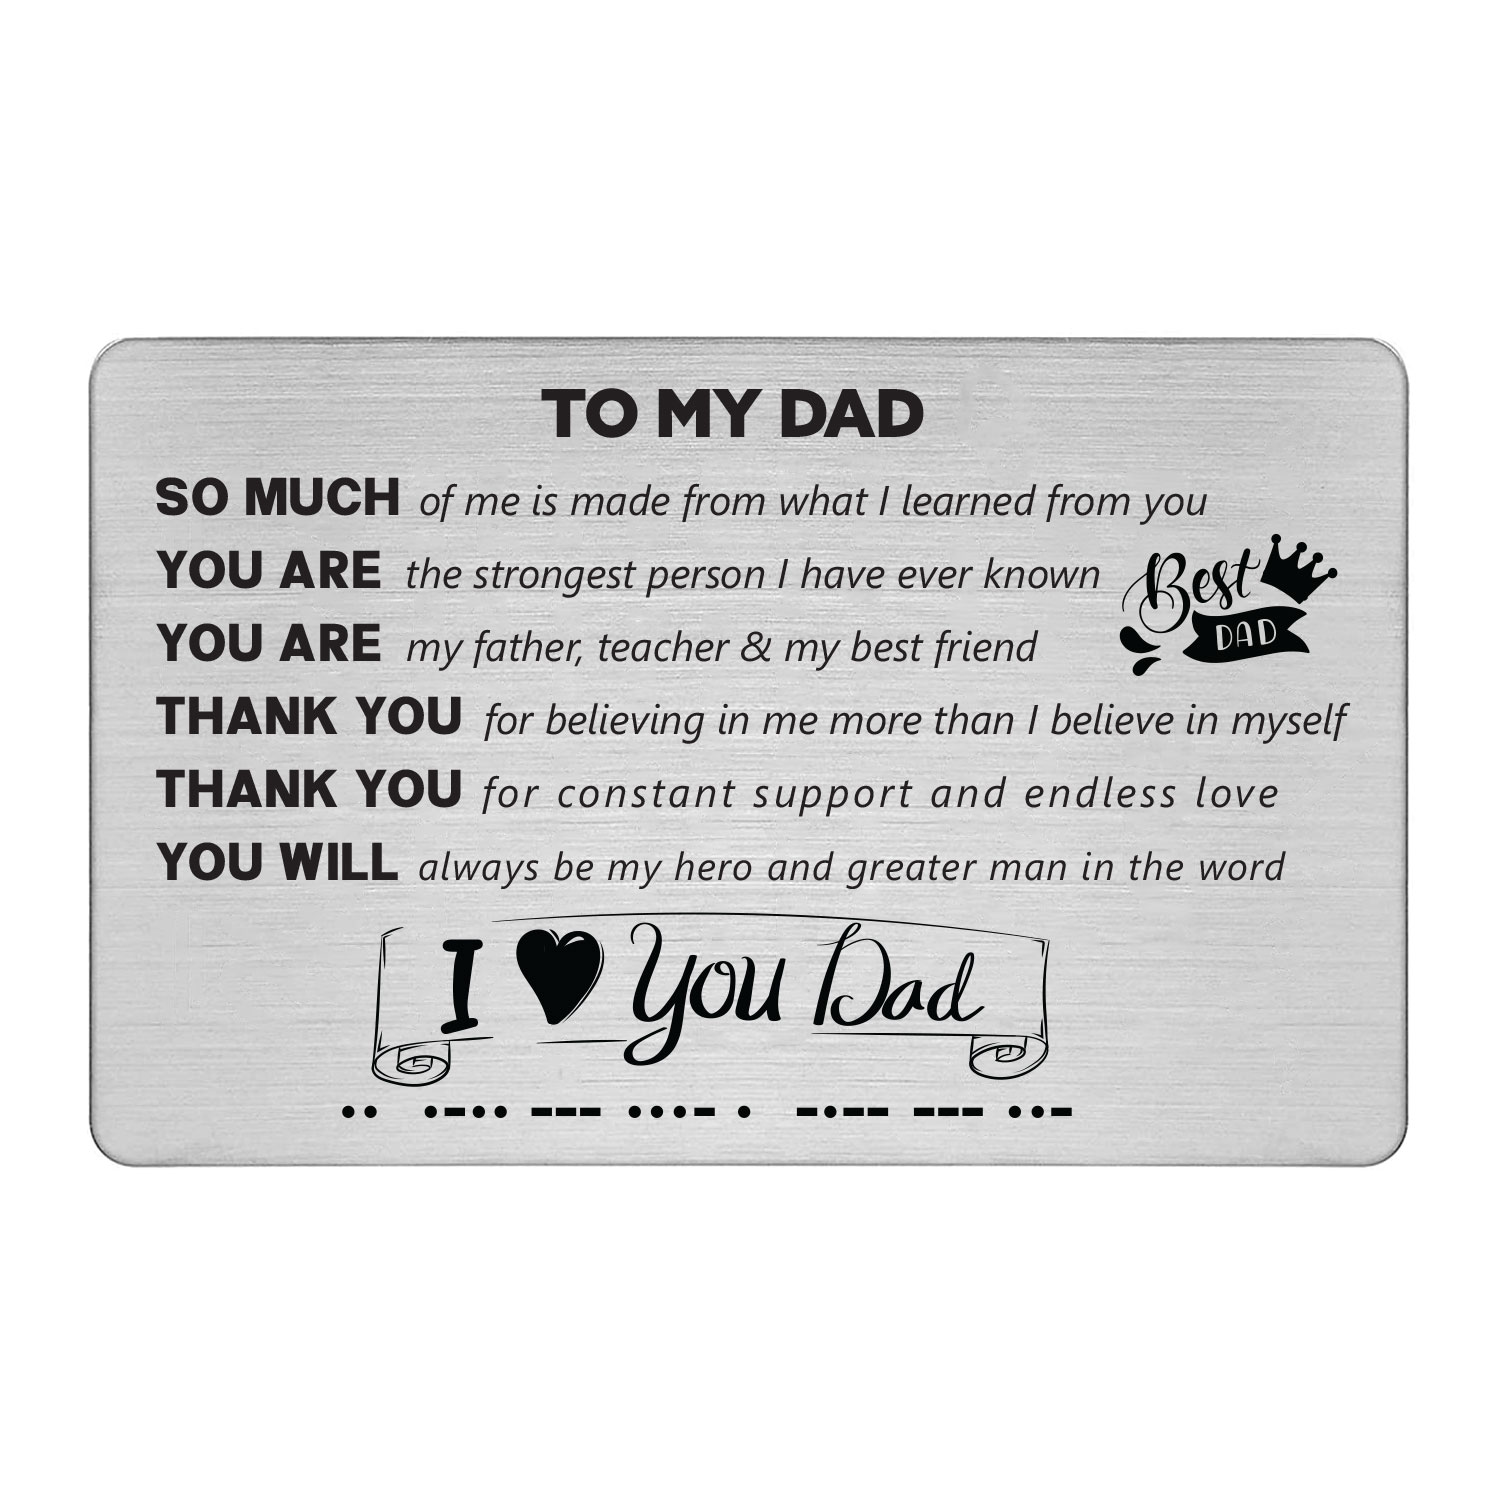 TO MY DAD (METAL CARD and BRACELET)